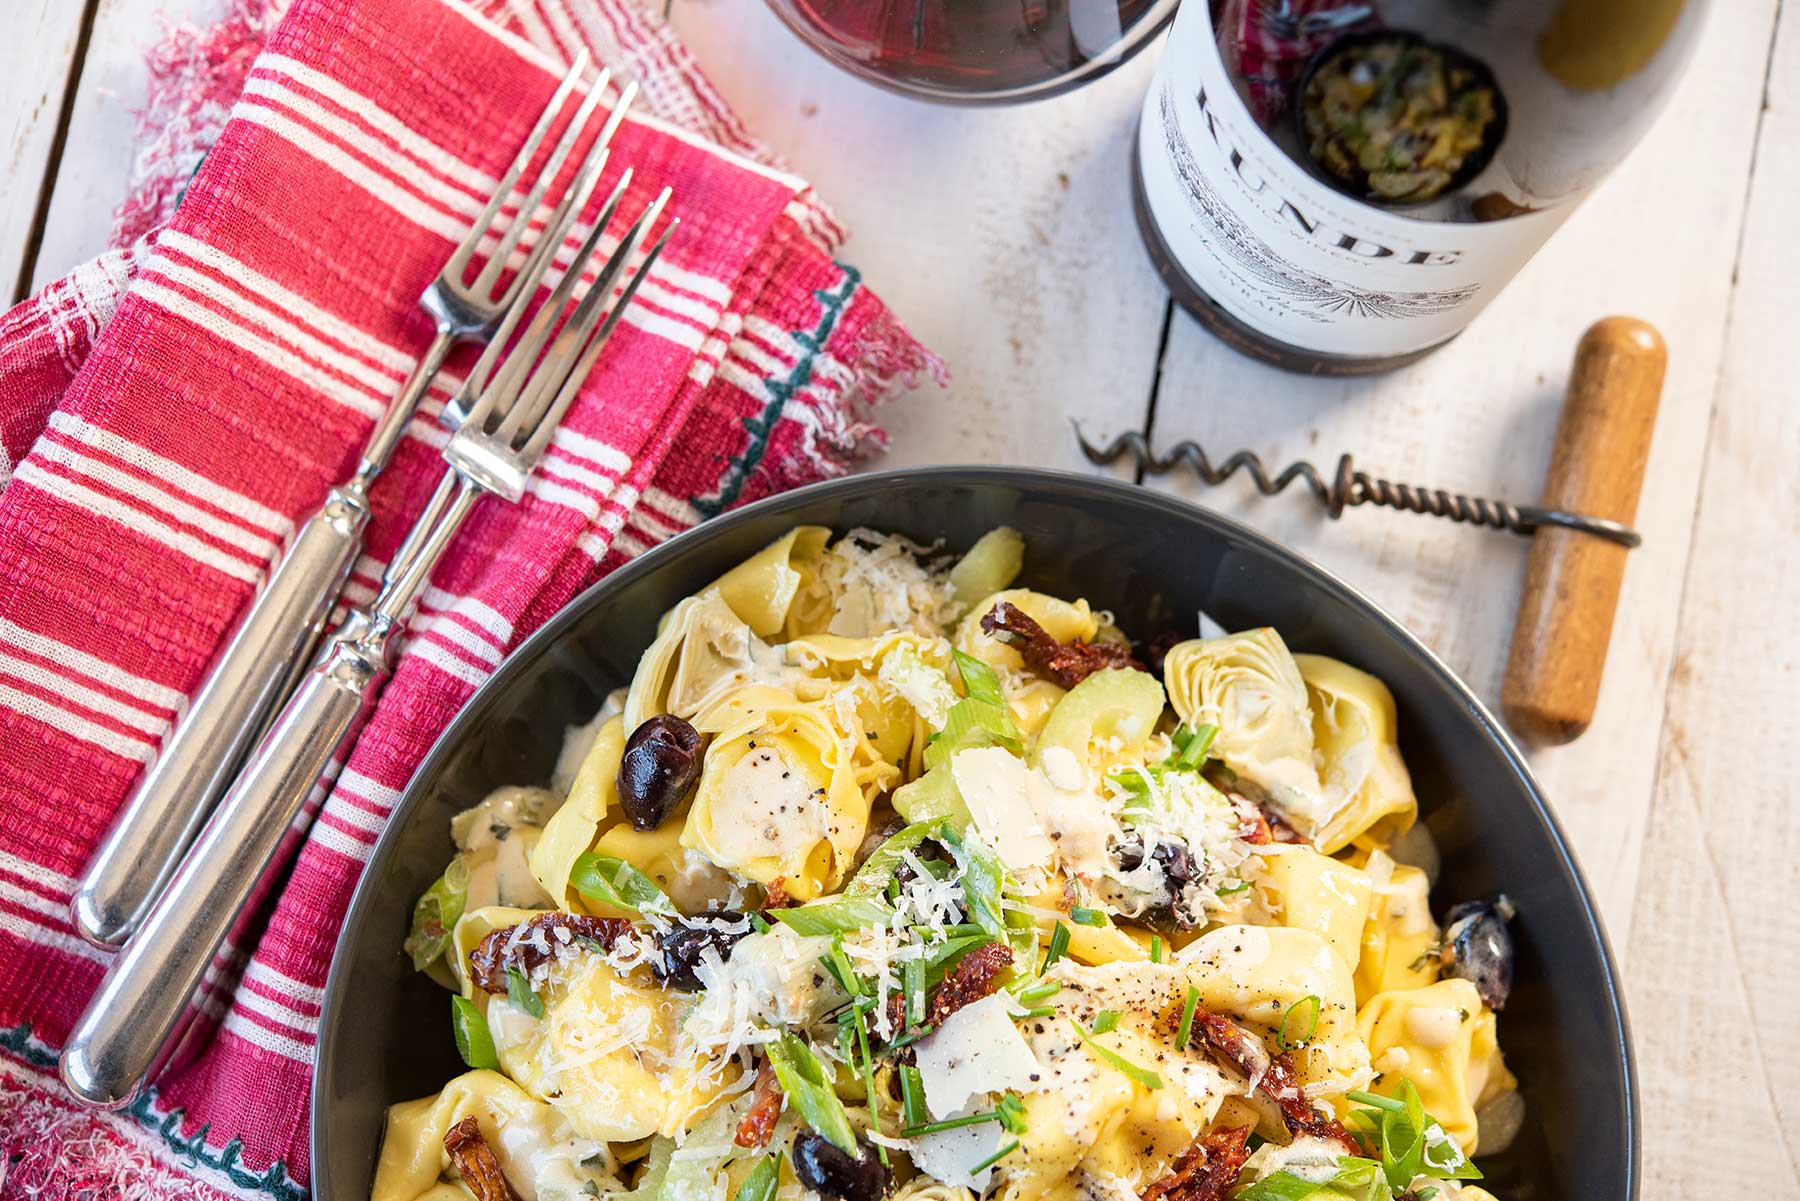 Tortellini Salad with Artichokes and Sun Dried Tomatoes